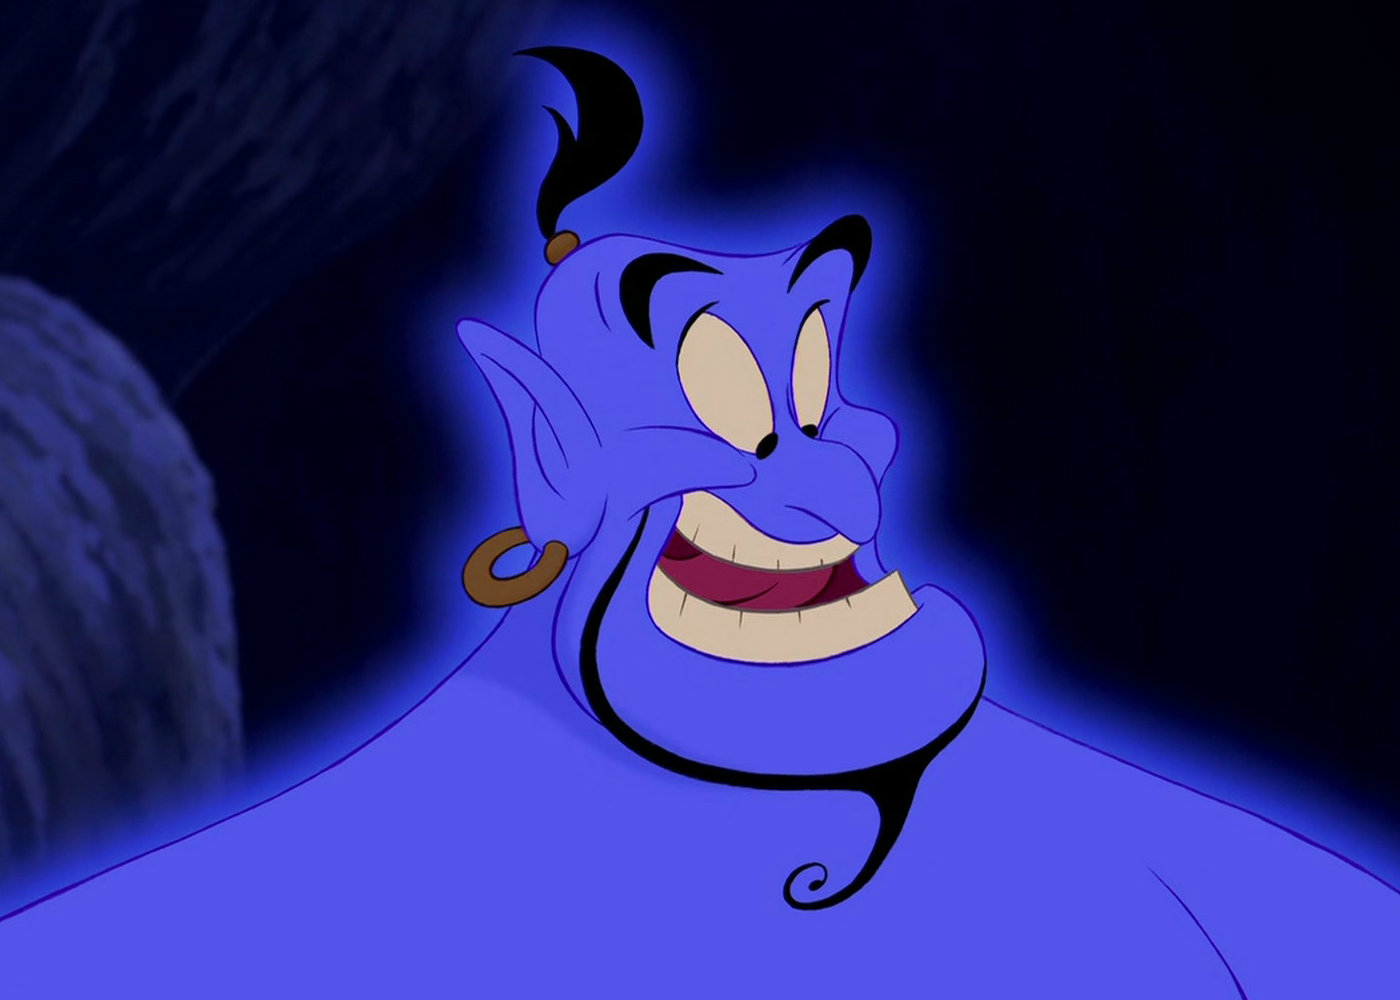 Disney’s Live-Action Aladdin: Will Smith in Talks to Play Genie